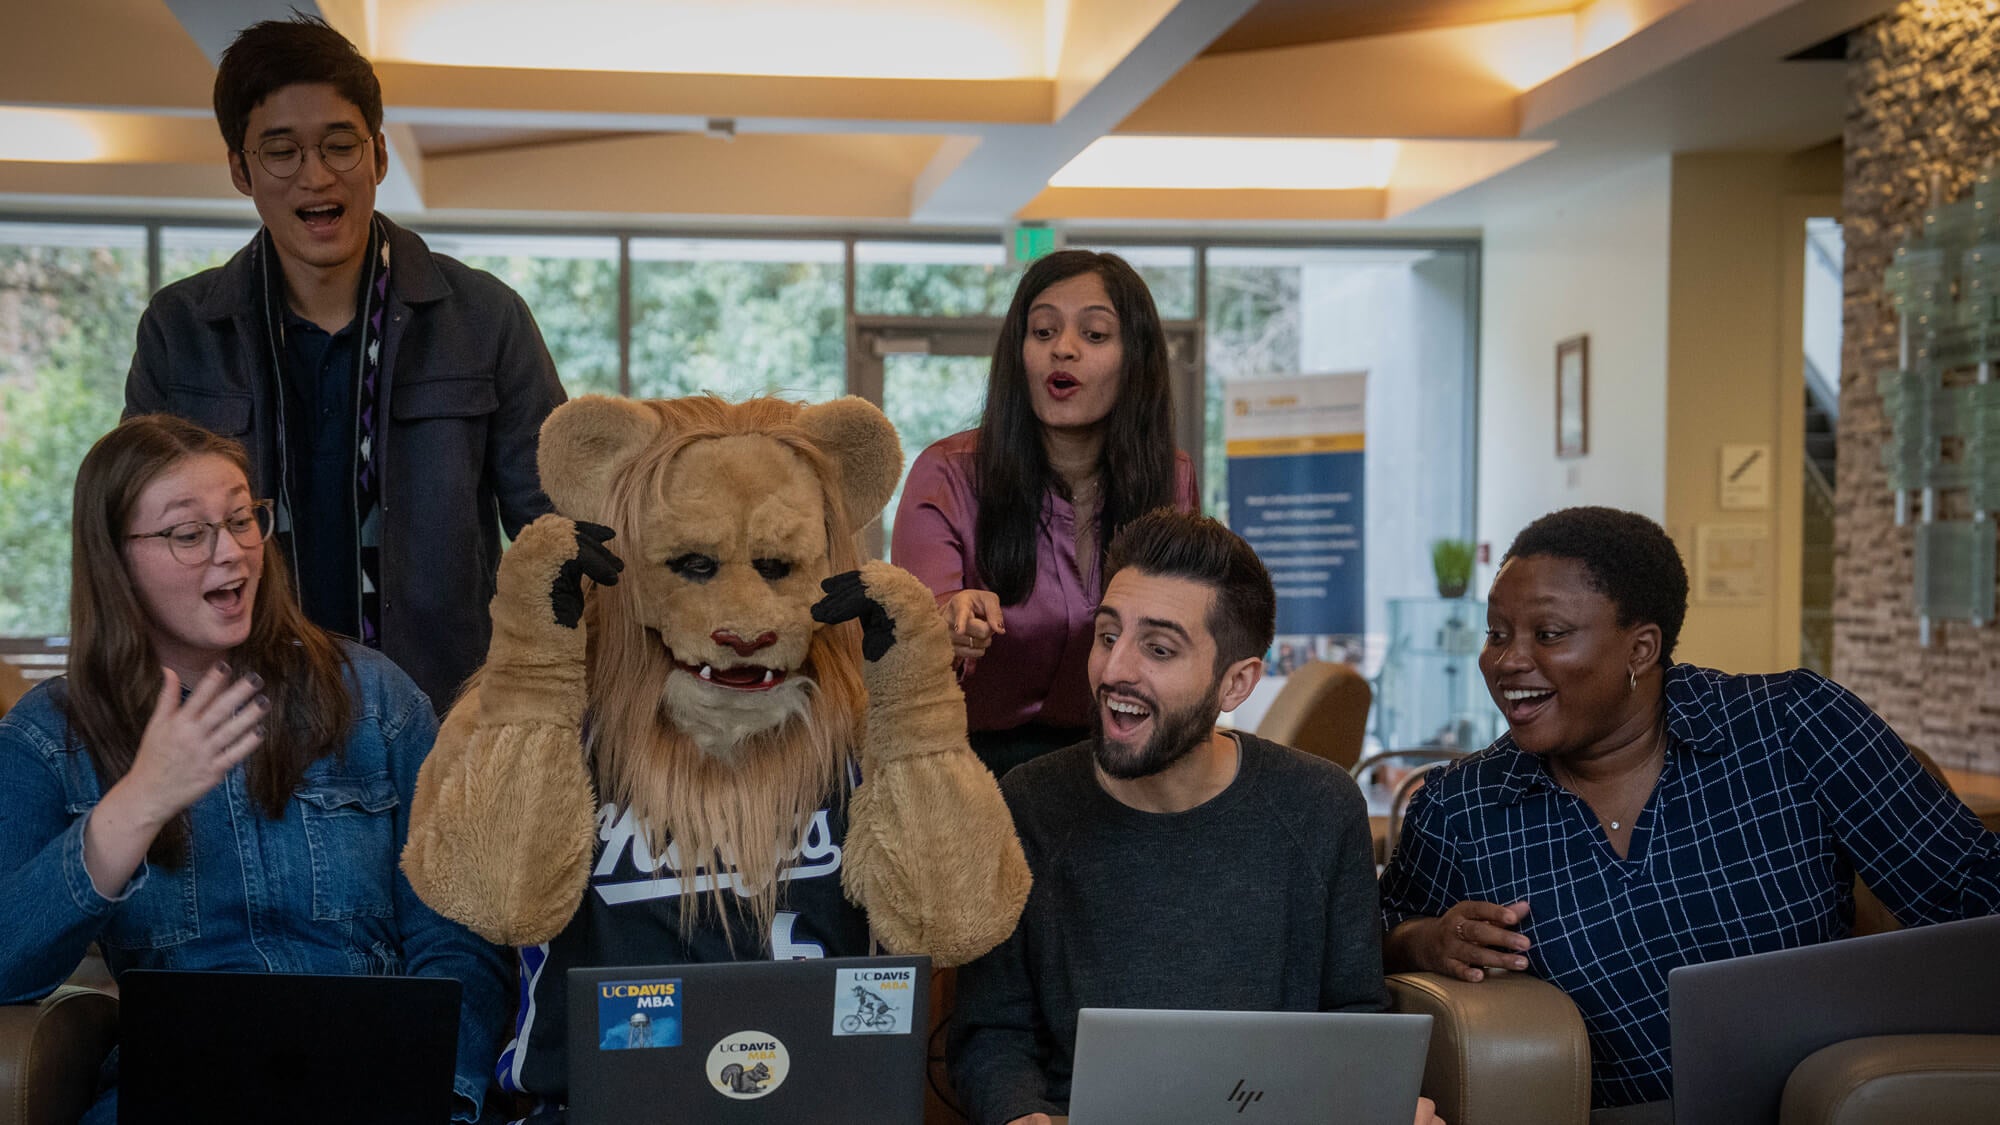 UC Davis MBA students enjoy an impromptu visit from Slamson the Lion, bringing smiles and a playful break to their study group. (Tim McConville/UC Davis)